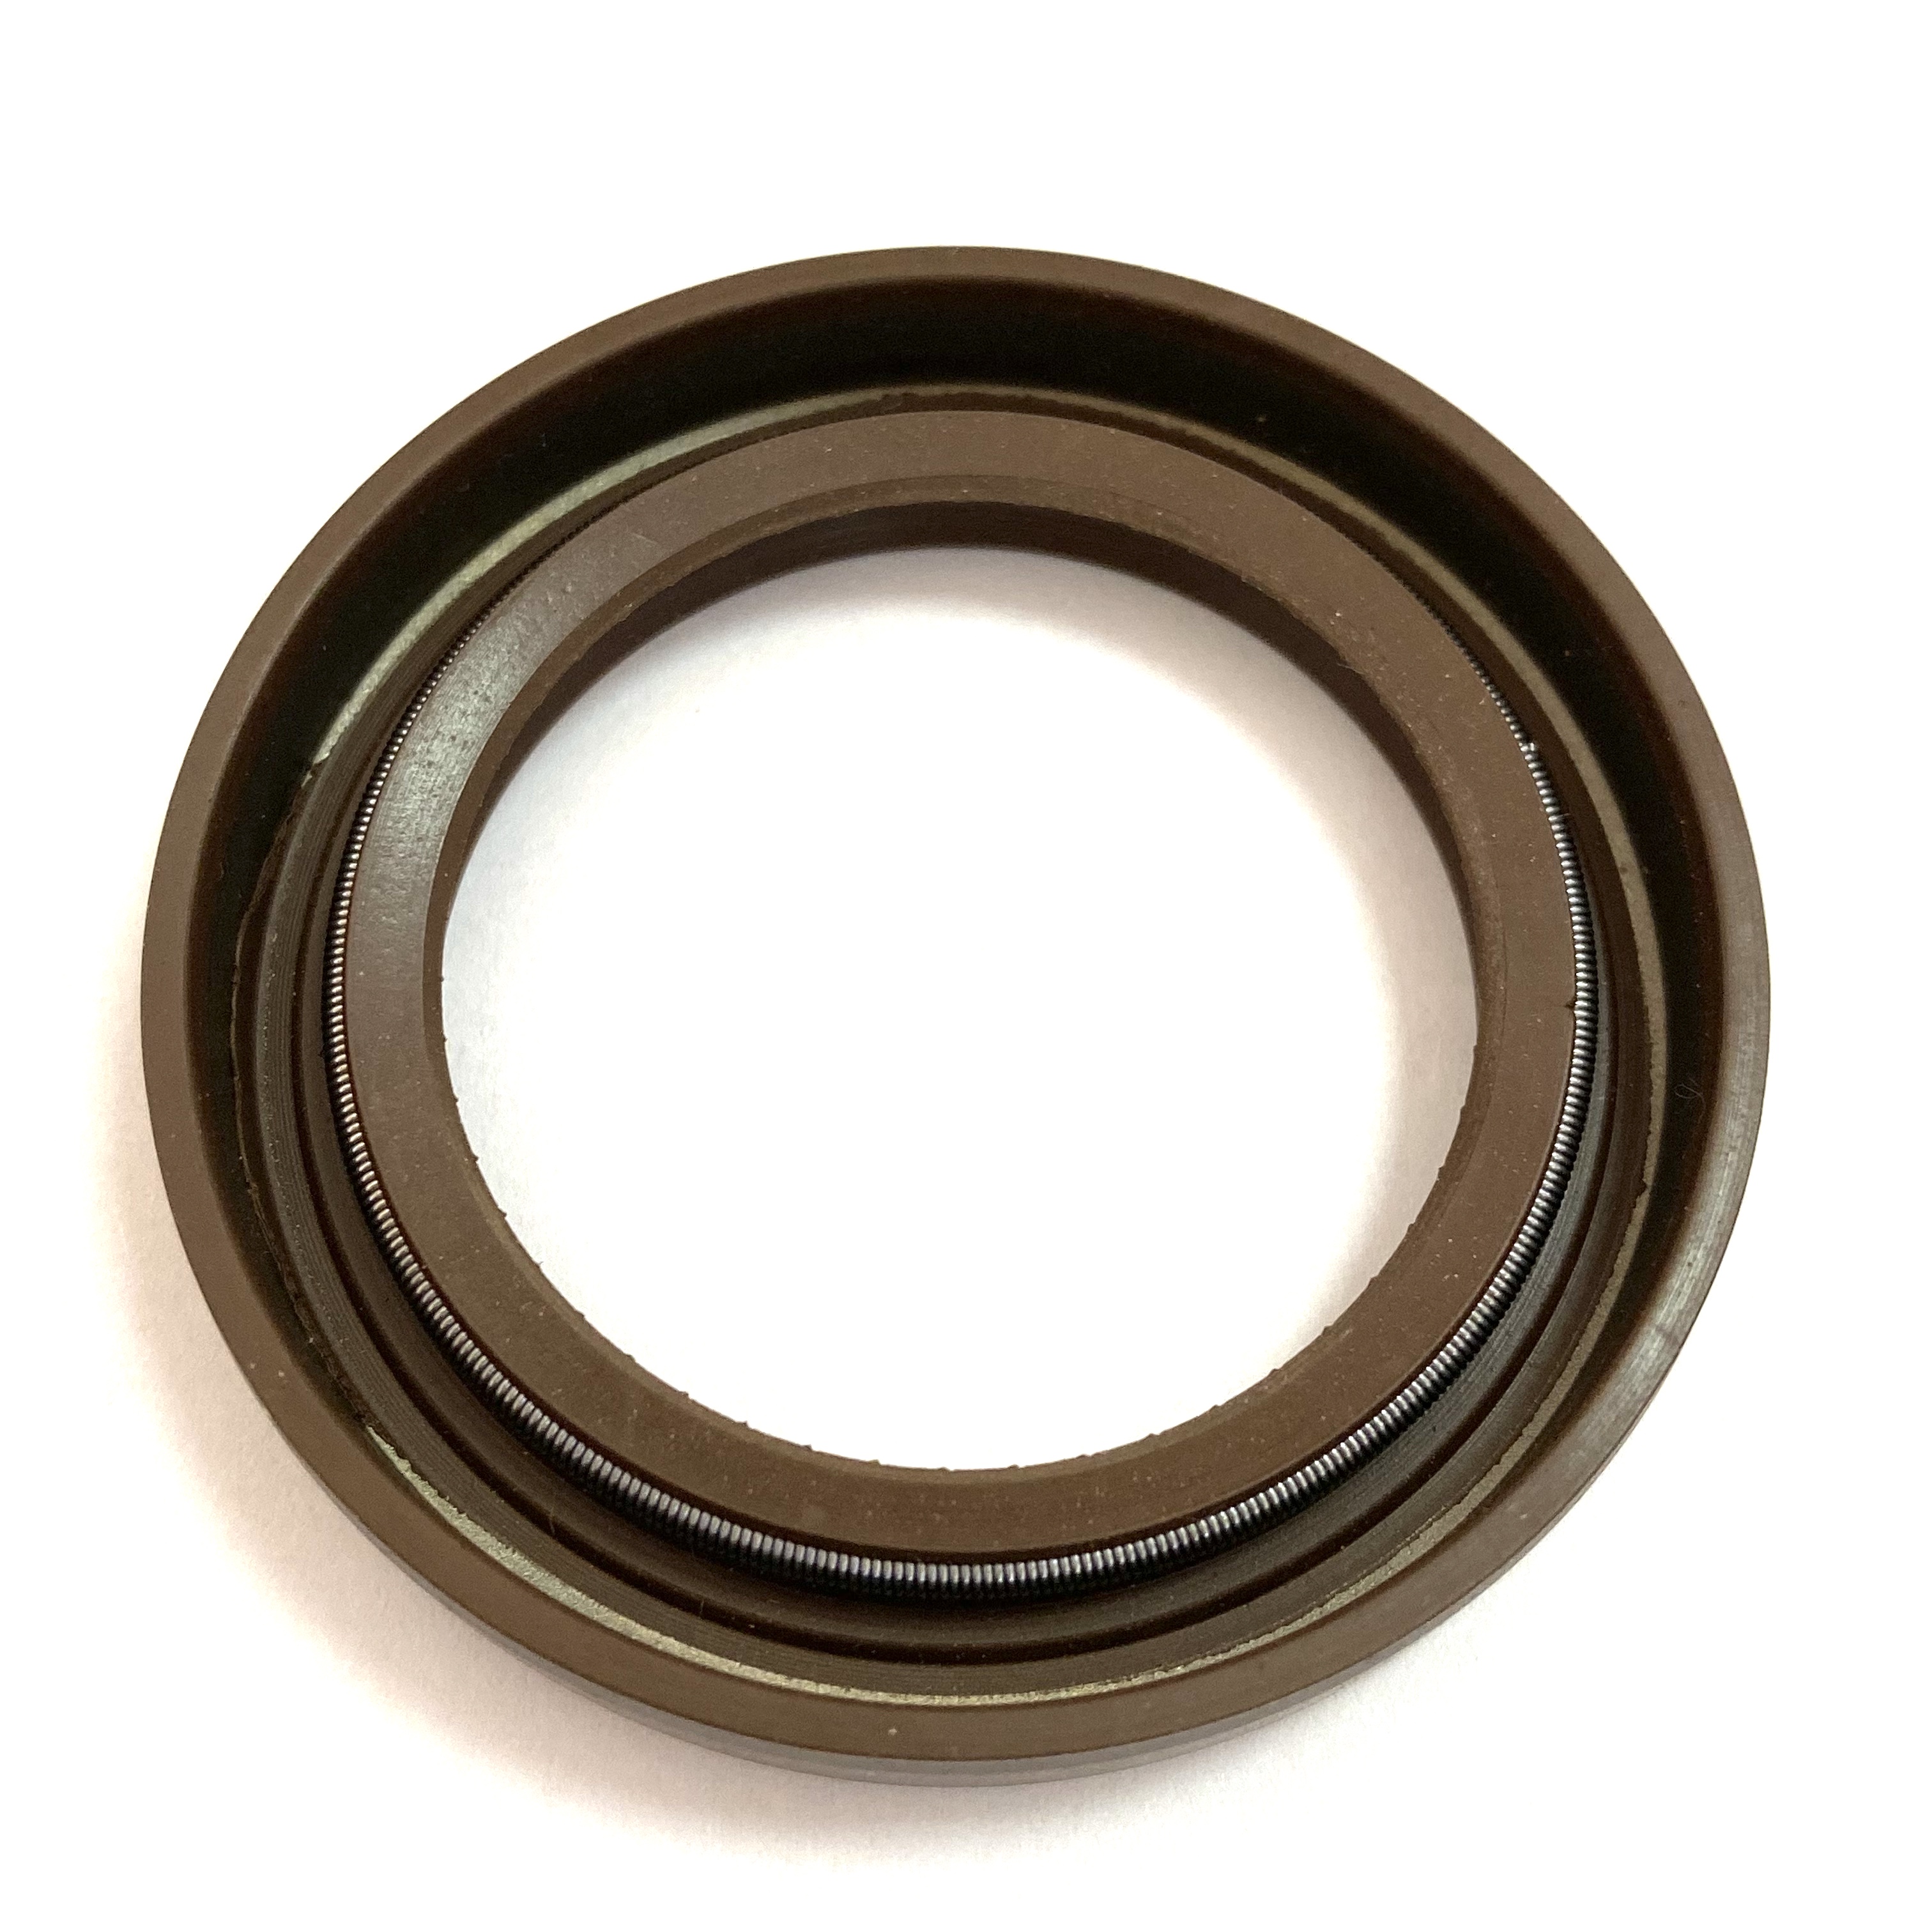 XTSEAO High quality automotive seals Crankshaft oil seal Size35*50*8 OE MD372536 Brown oil seal Rubber FPM NBR FOR Mit sub ishi